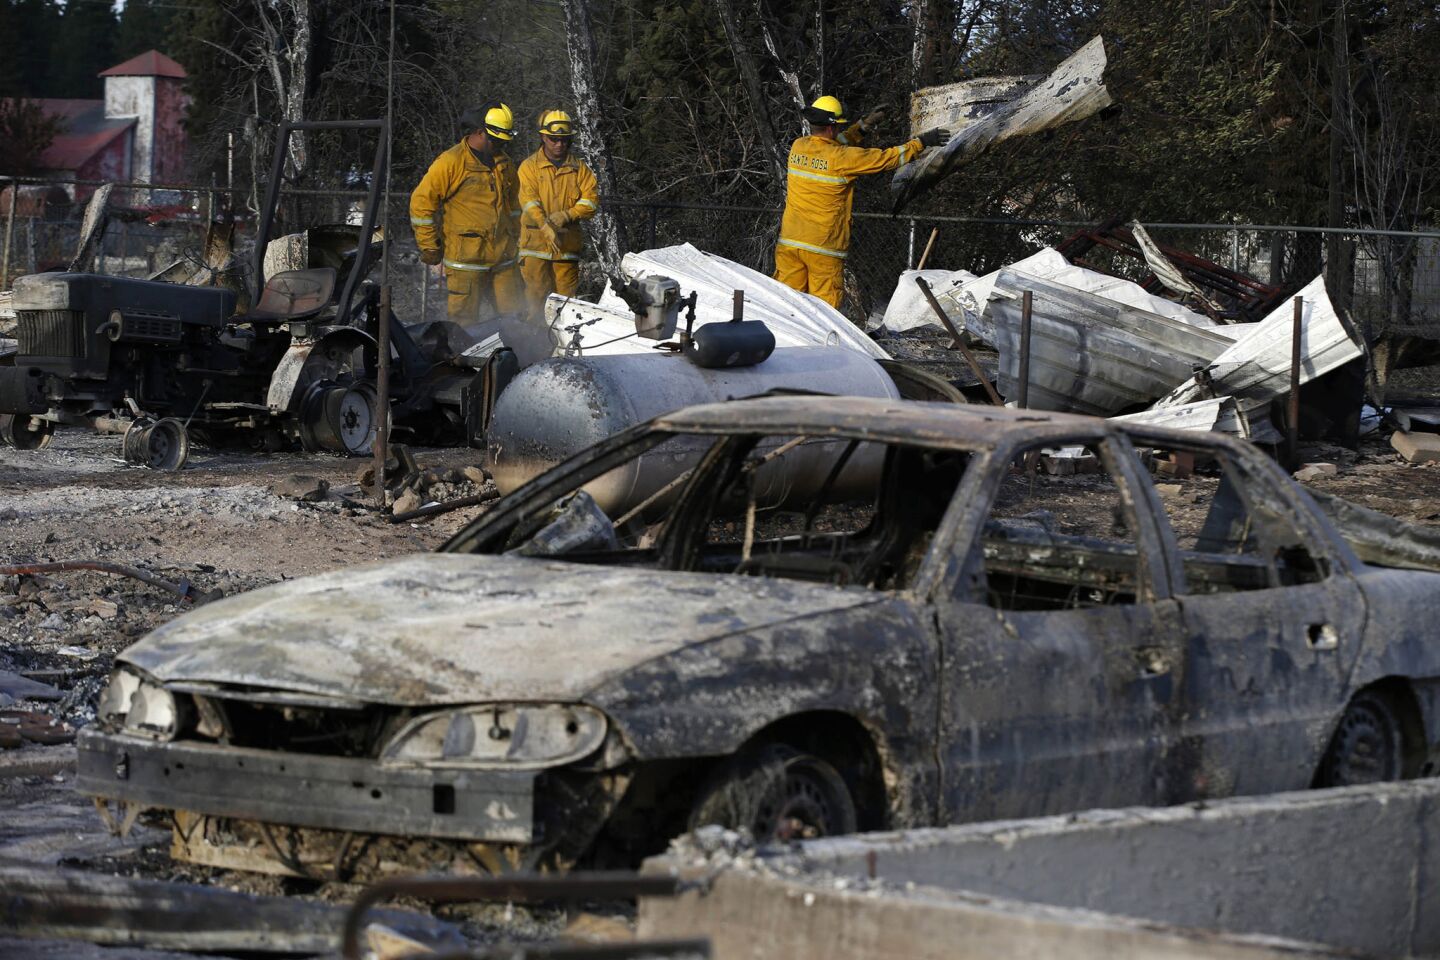 Santa Rosa city firefighters clear debris in search of hot spots in the Angel Valley neighborhood of Weed, Calif., where many homes were destroyed by the Boles fire.